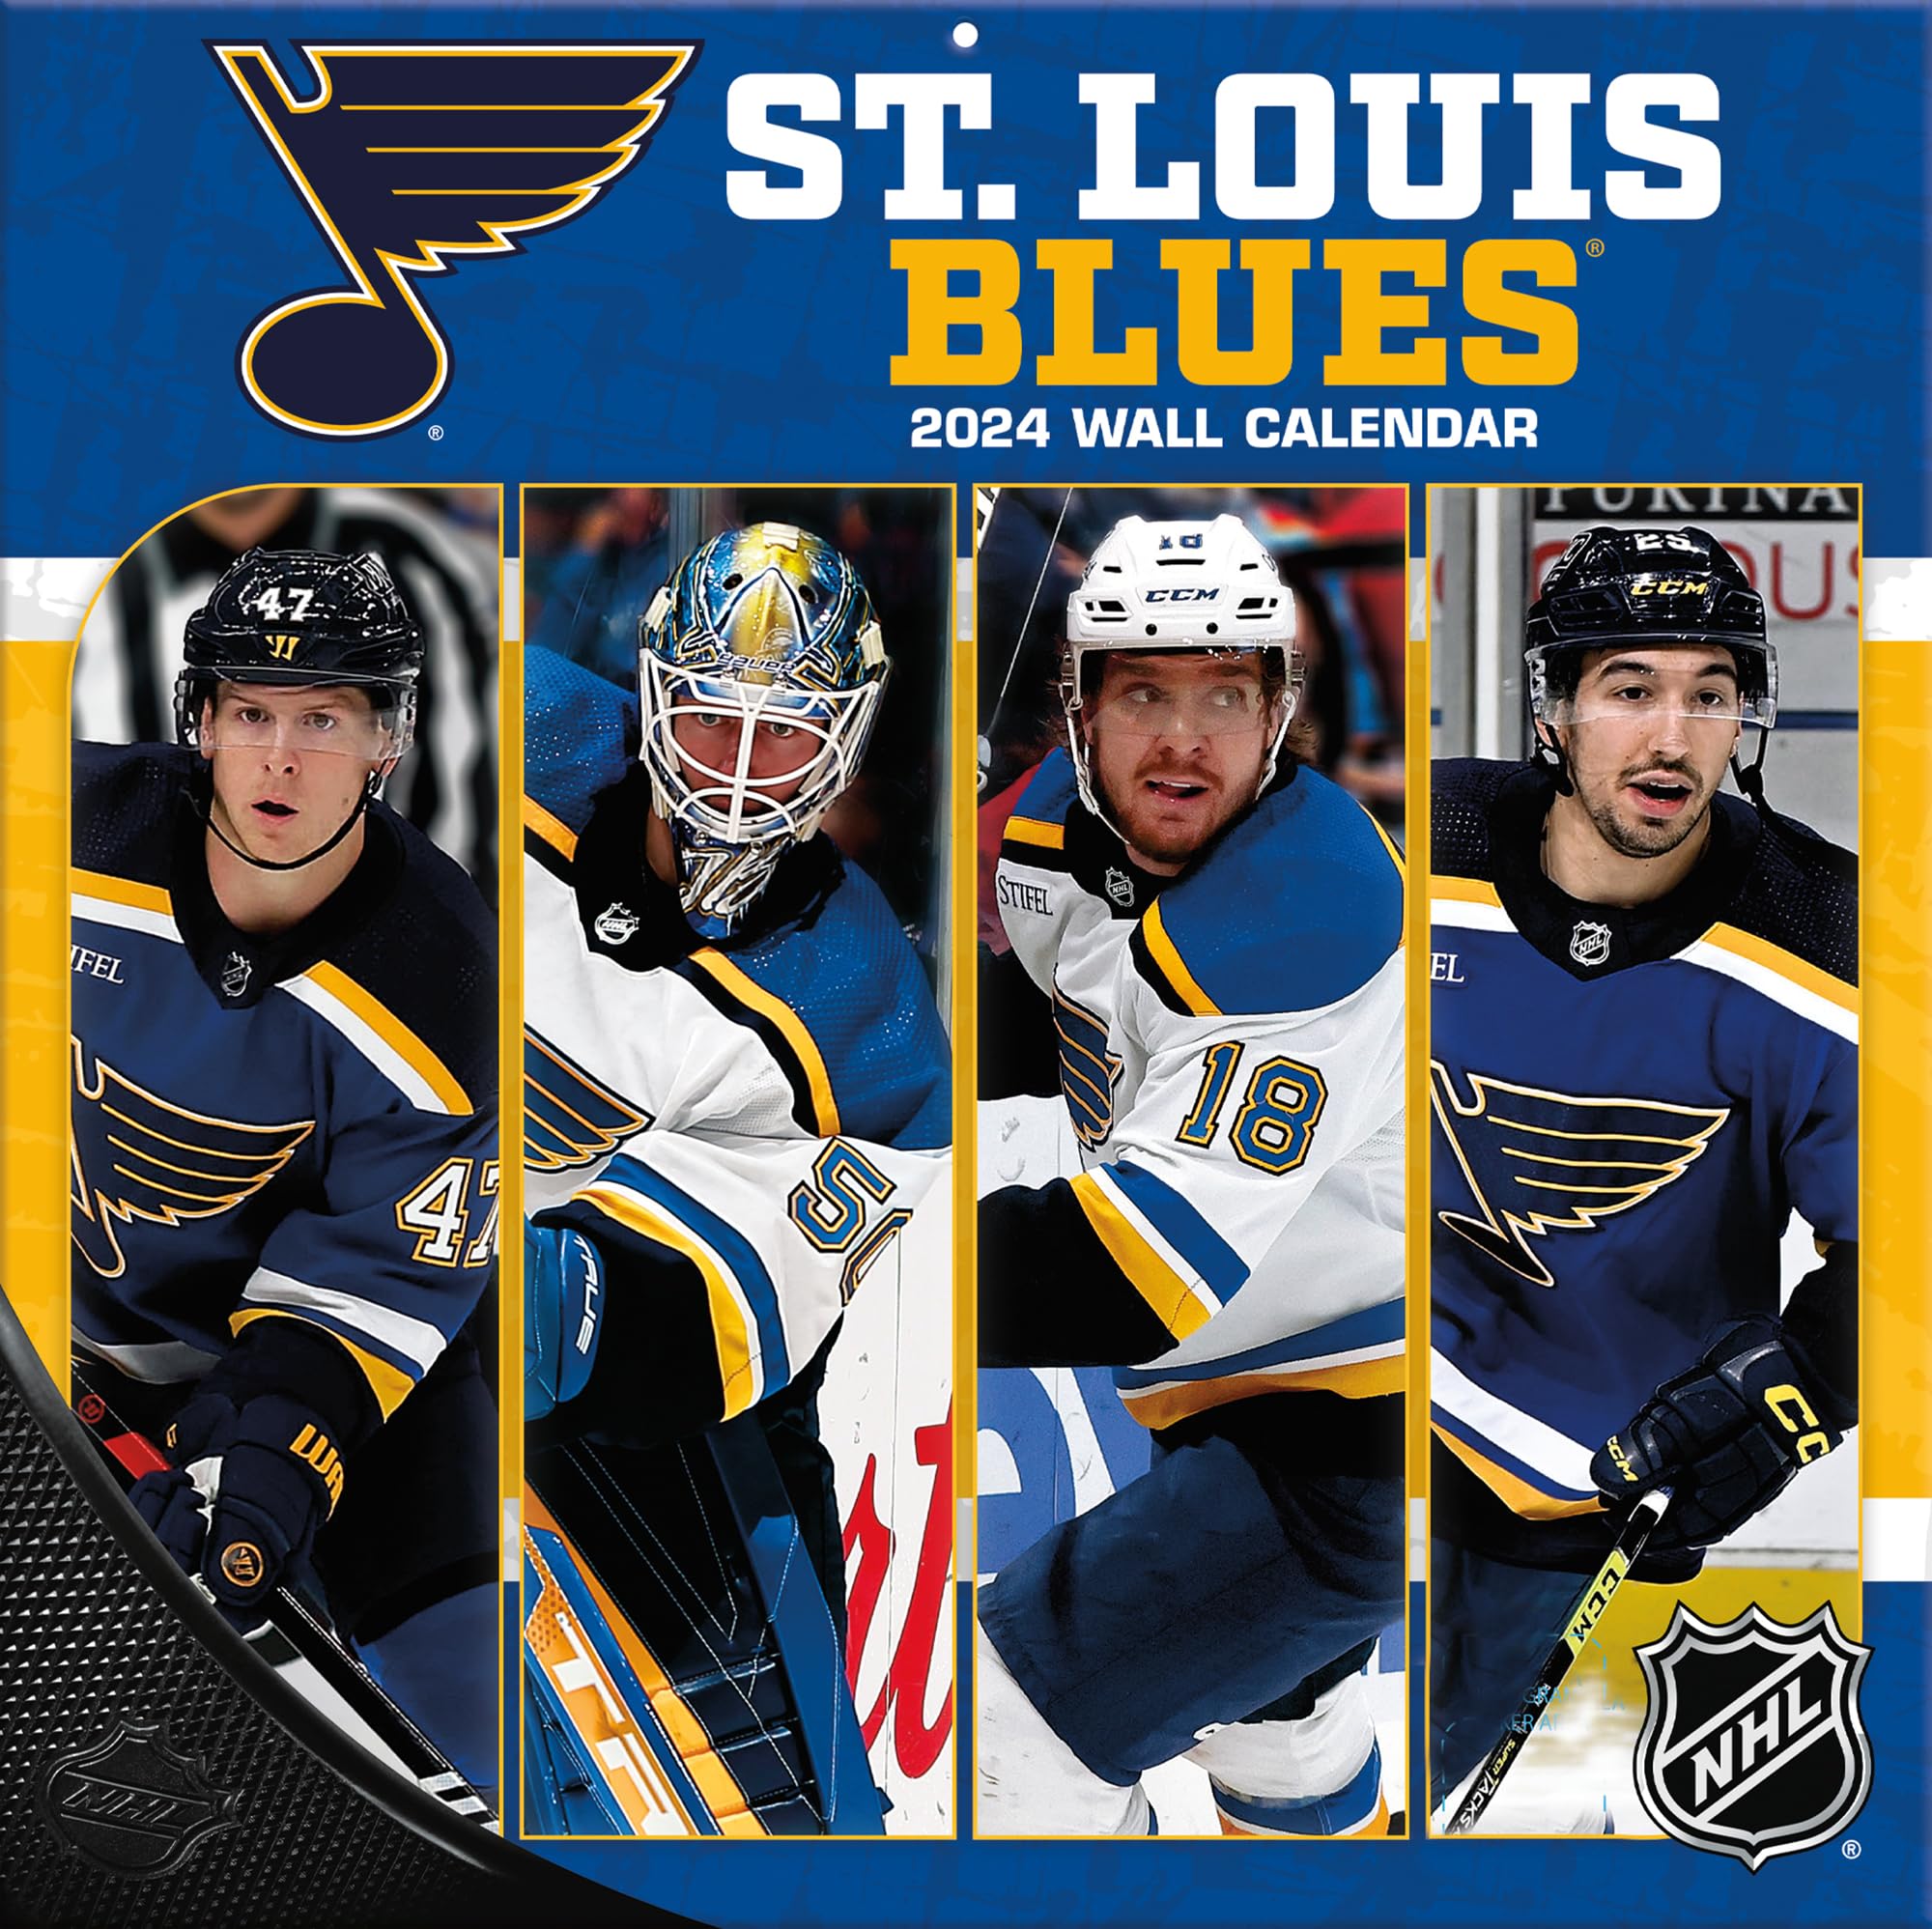 St louis blues x team wall calendar turner sports office products